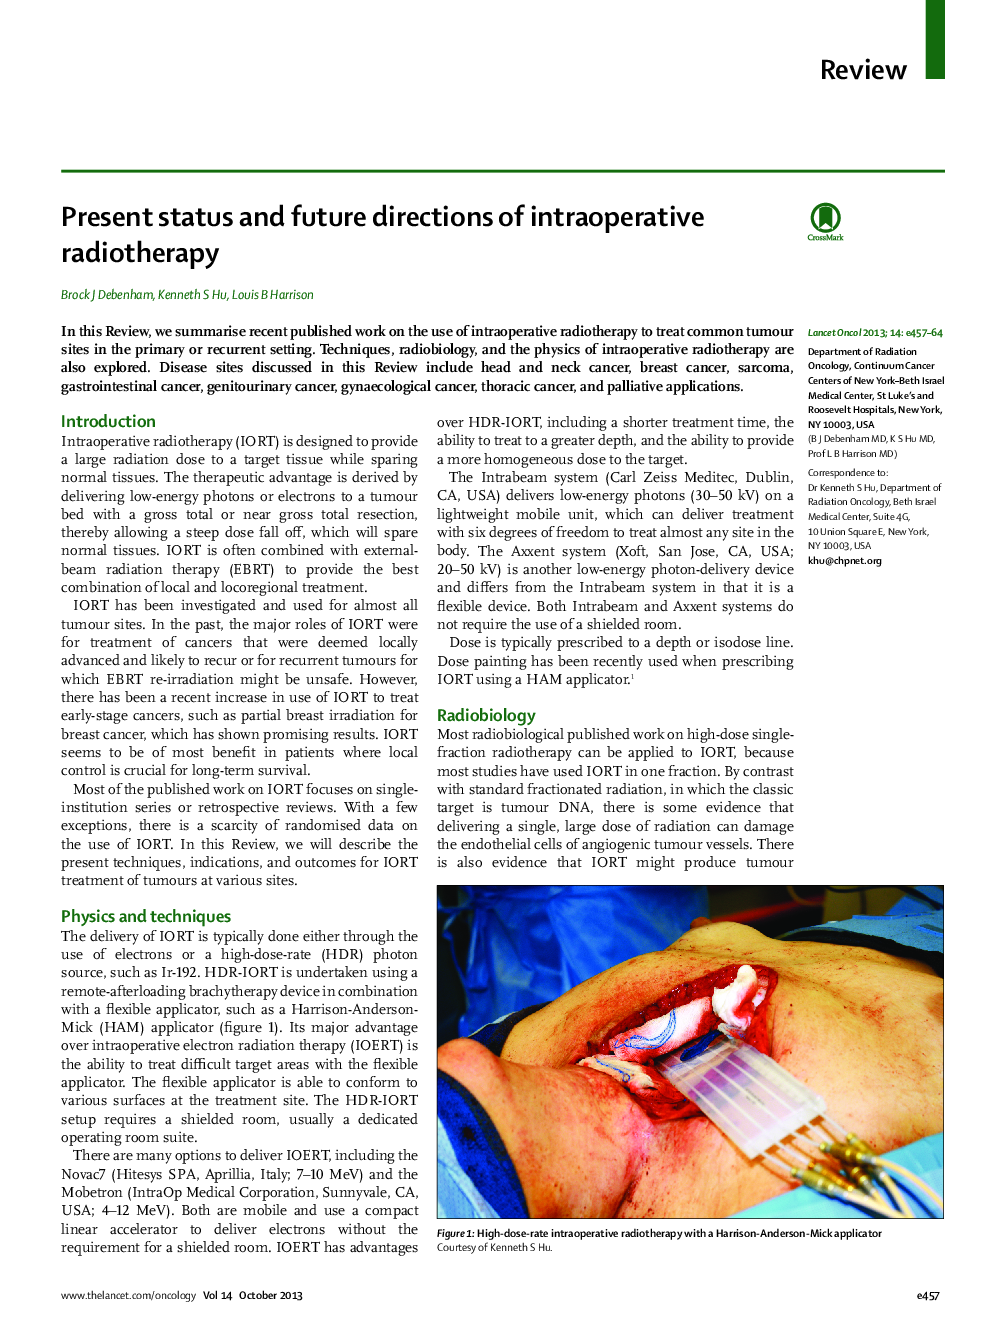 Present status and future directions of intraoperative radiotherapy